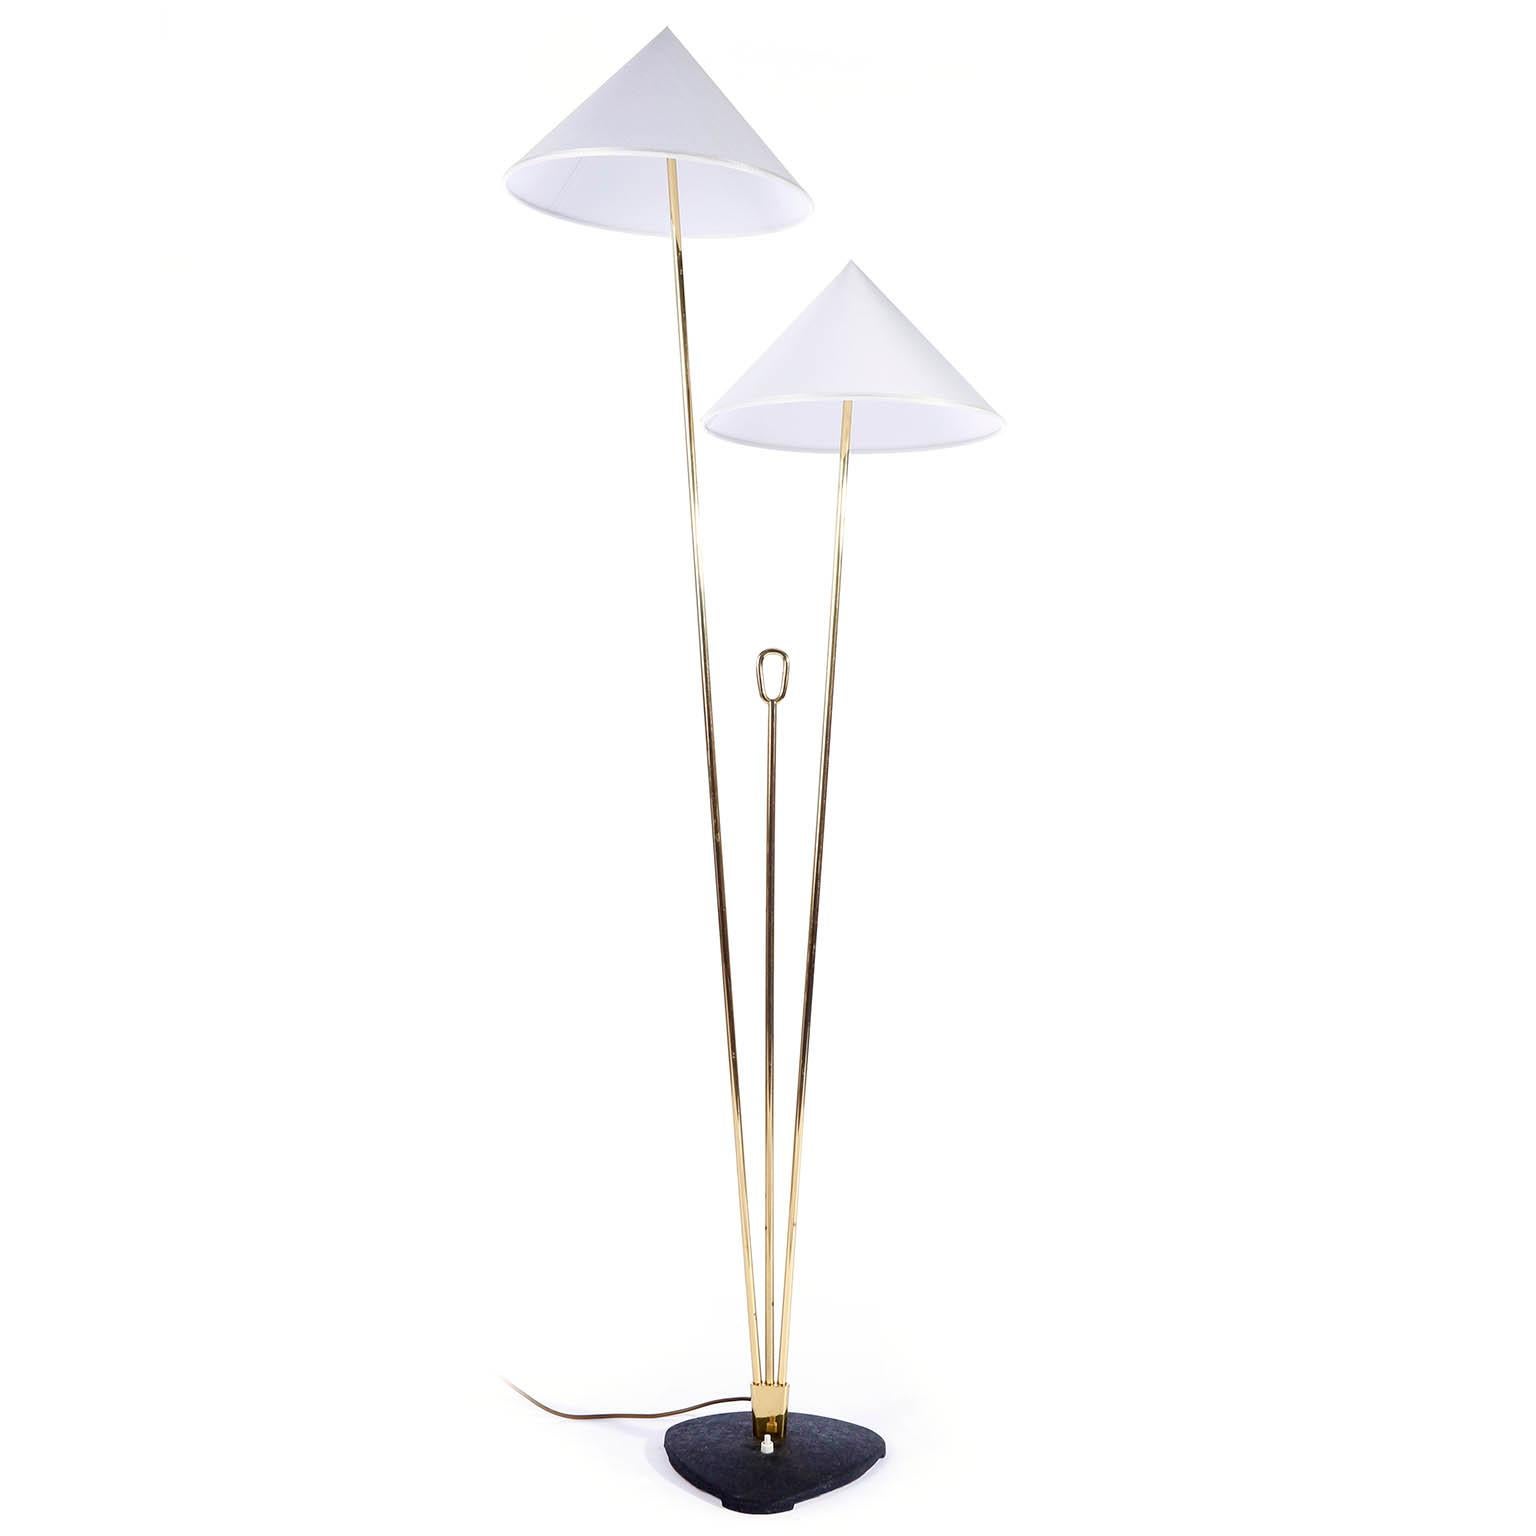 A brass floor lamp with cone shaped lampshades by Rupert Nikoll, Vienna, Austria, manufactured in midcentury, circa 1960 (late 1950s or early 1960s).
The stand is made of two brass rods in different lengths and in between is a shorter brass rod